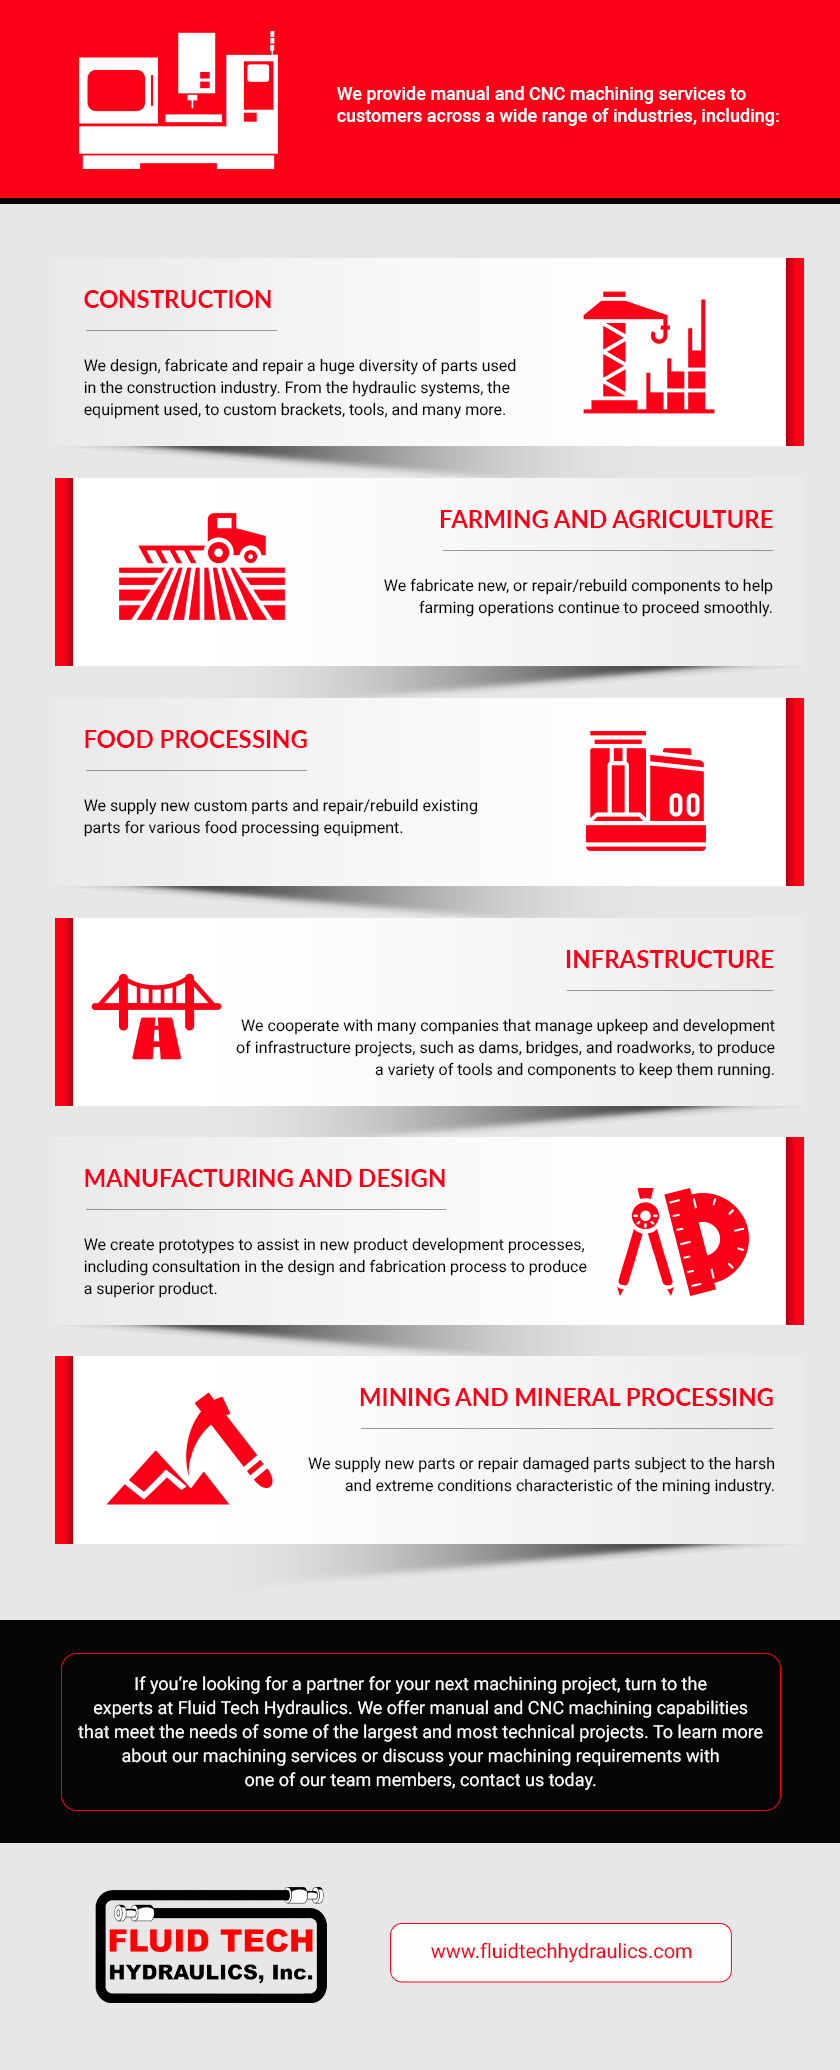 An infographic depicting the various industries Fluid-Tech Hydraulics works with